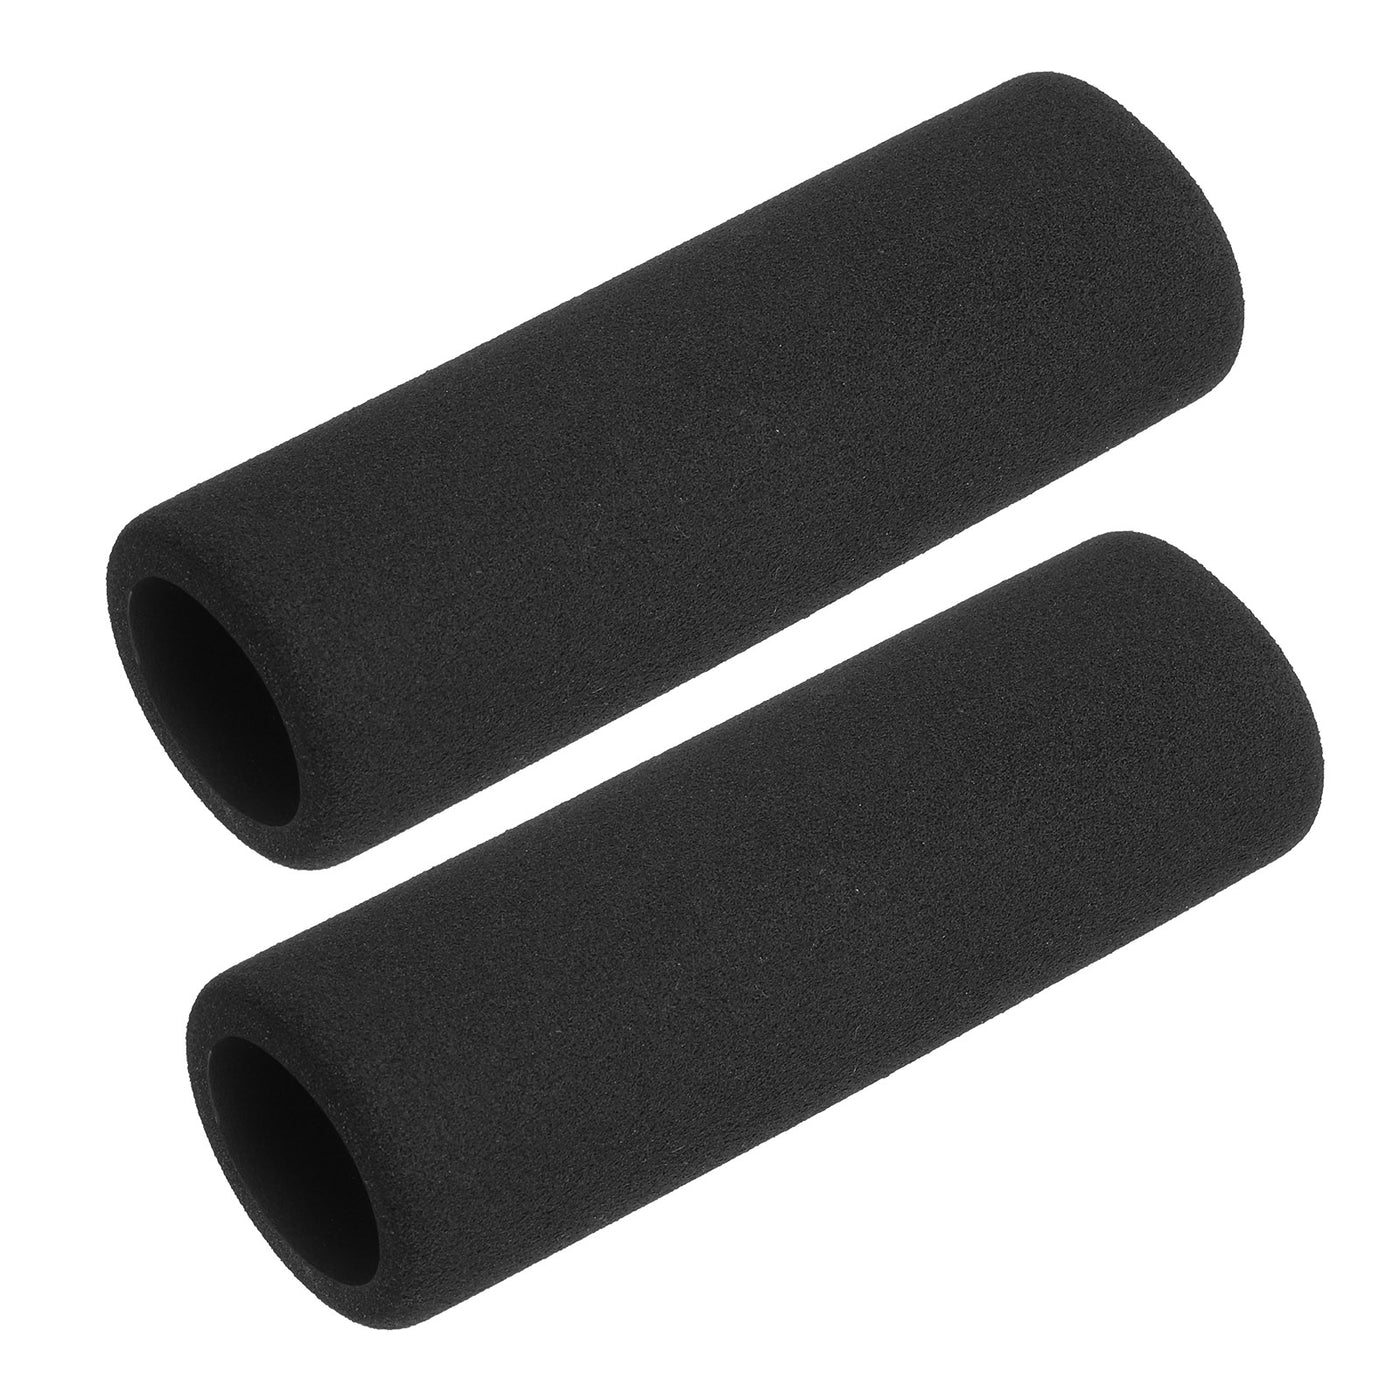 uxcell Uxcell Pipe Insulation Tube Foam Tubing for Handle Grip Support 27mm ID 37mm OD 116mm Heat Preservation Black 2pcs